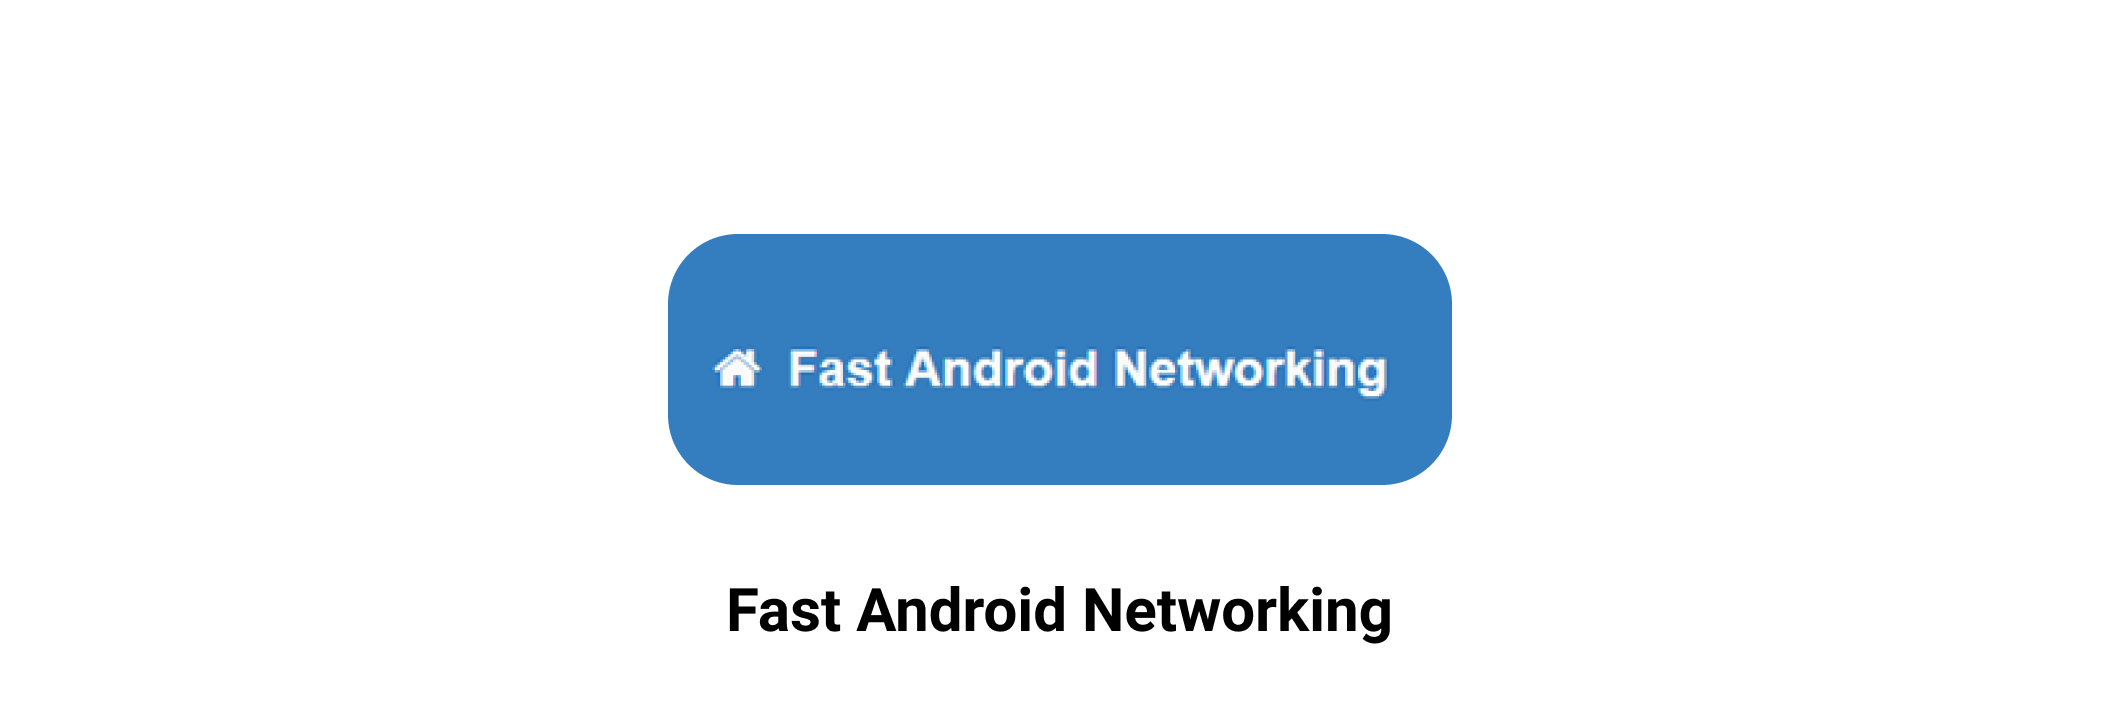 Best Android Development Tools Fast Android Networking